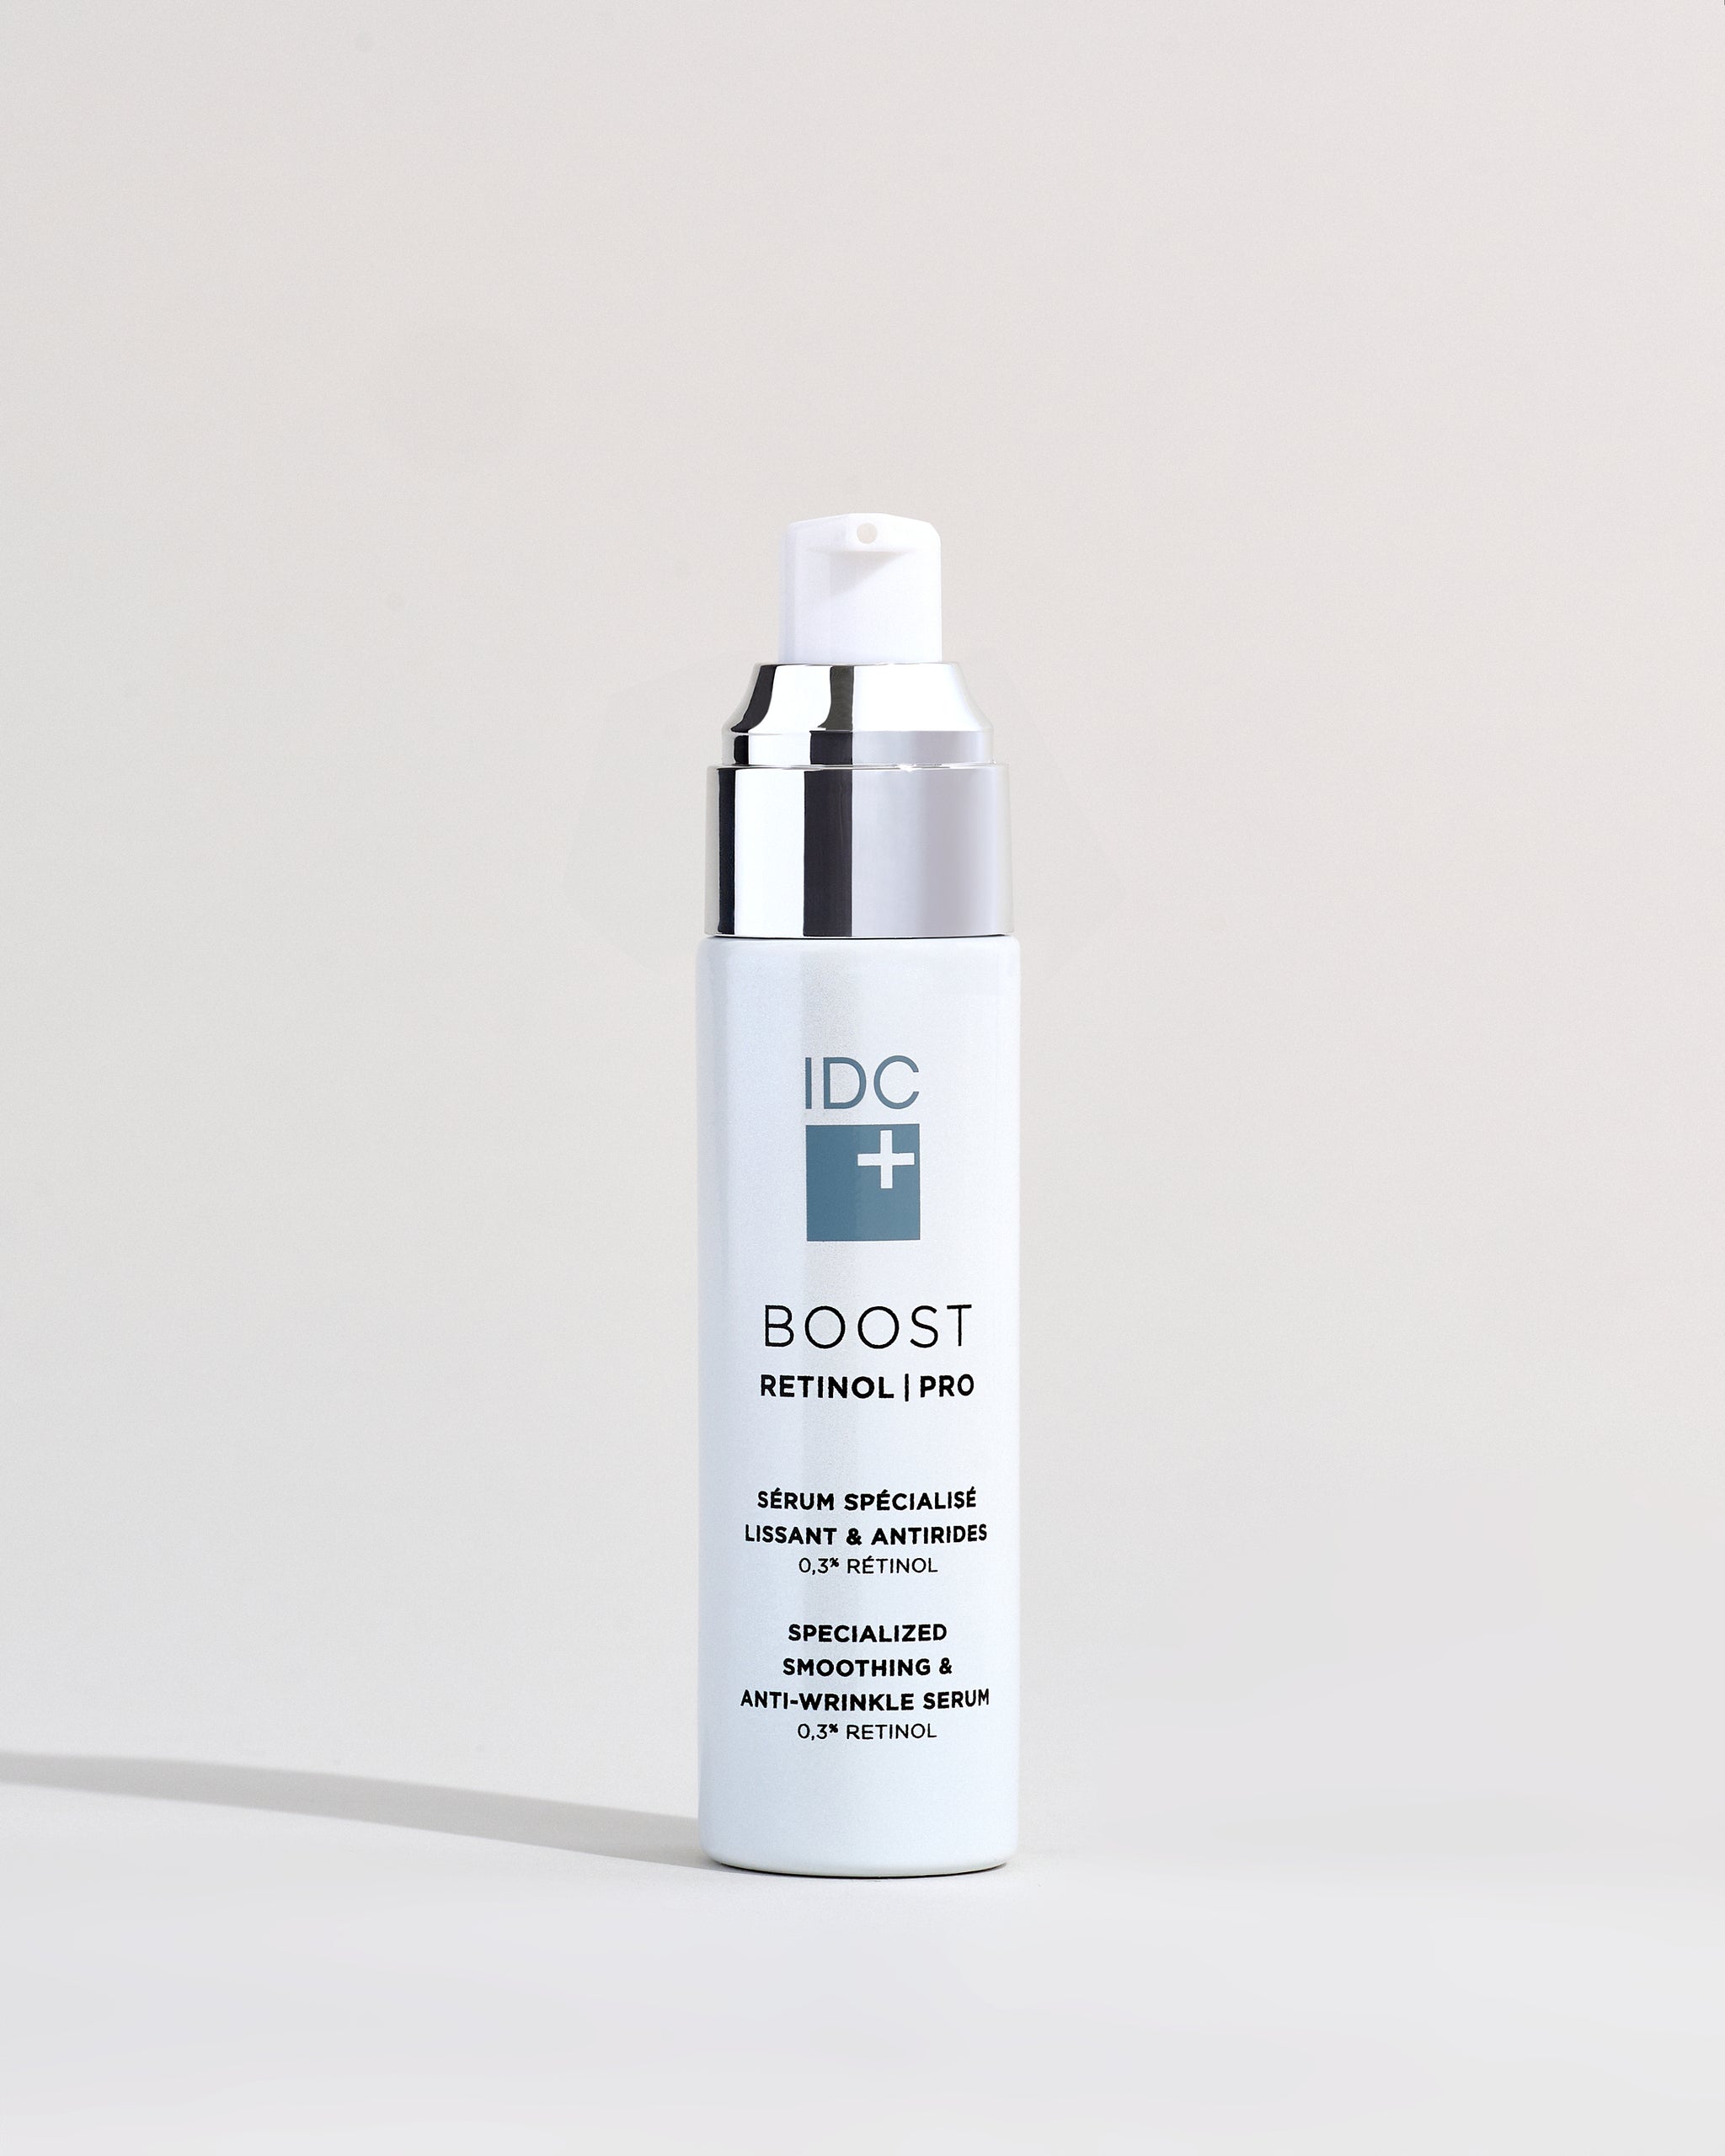 Boost Retinol Pro | Specialized Smoothing and Anti-Wrinkle Serum